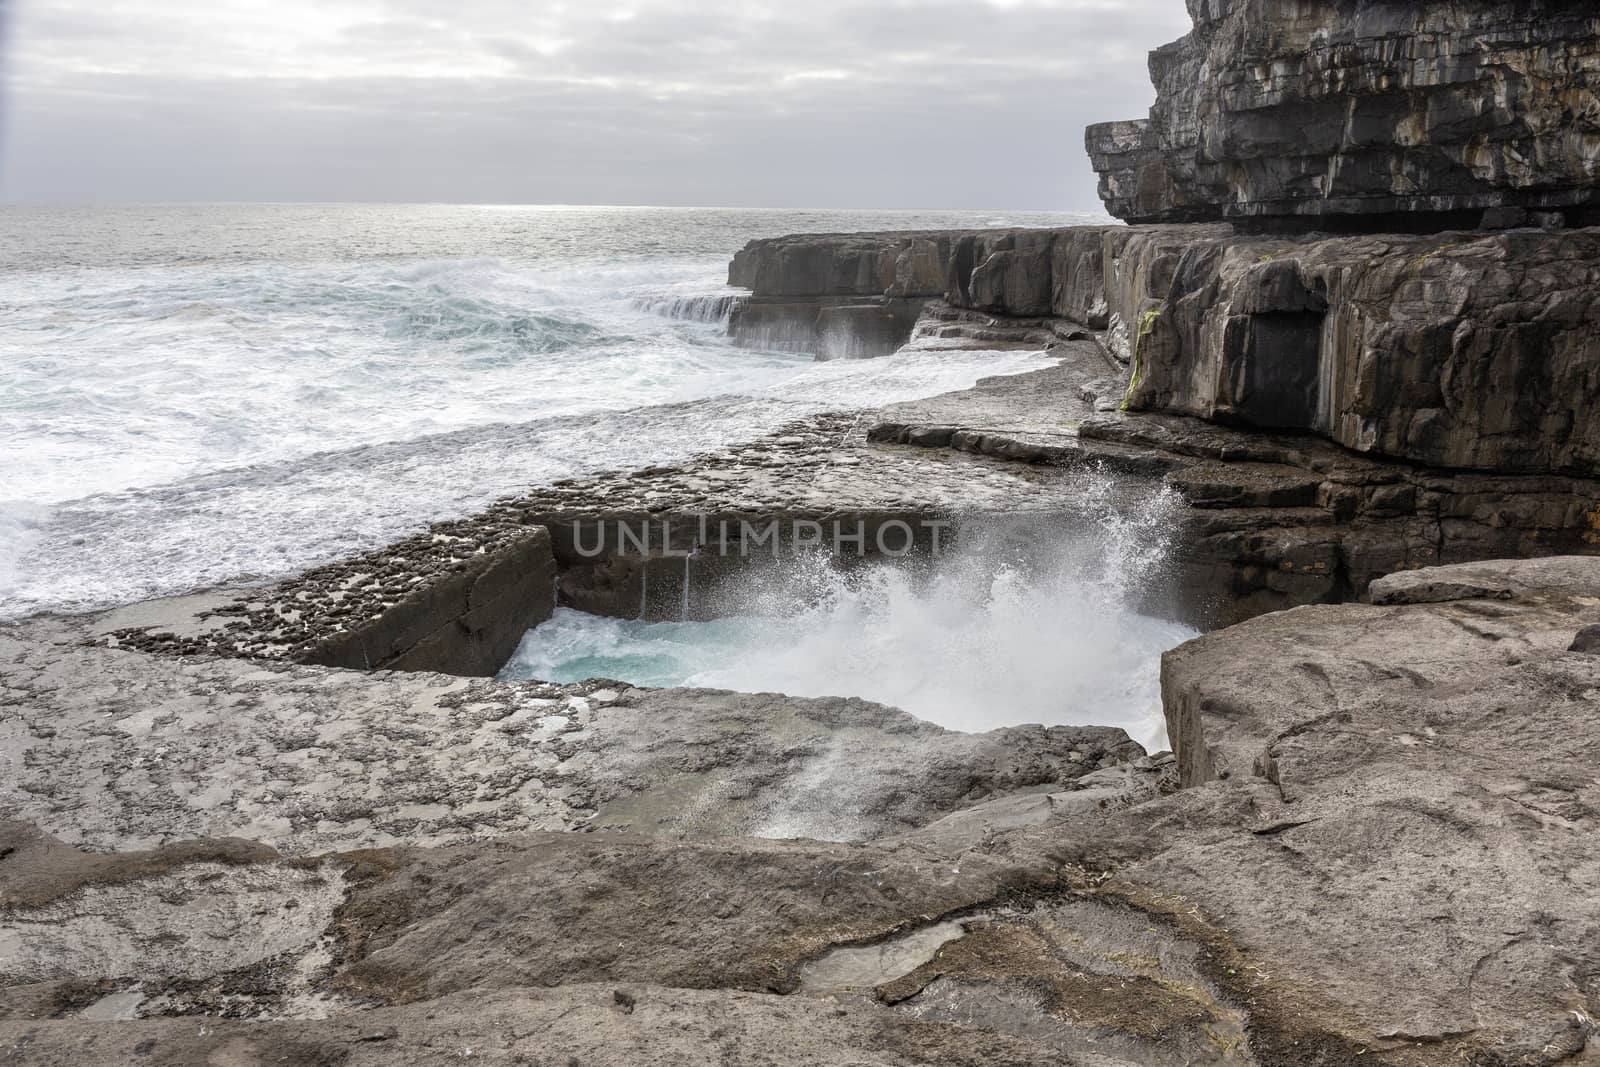 The Worm Hole, natural pool in Inishmore, Aran islands, Ireland - Image